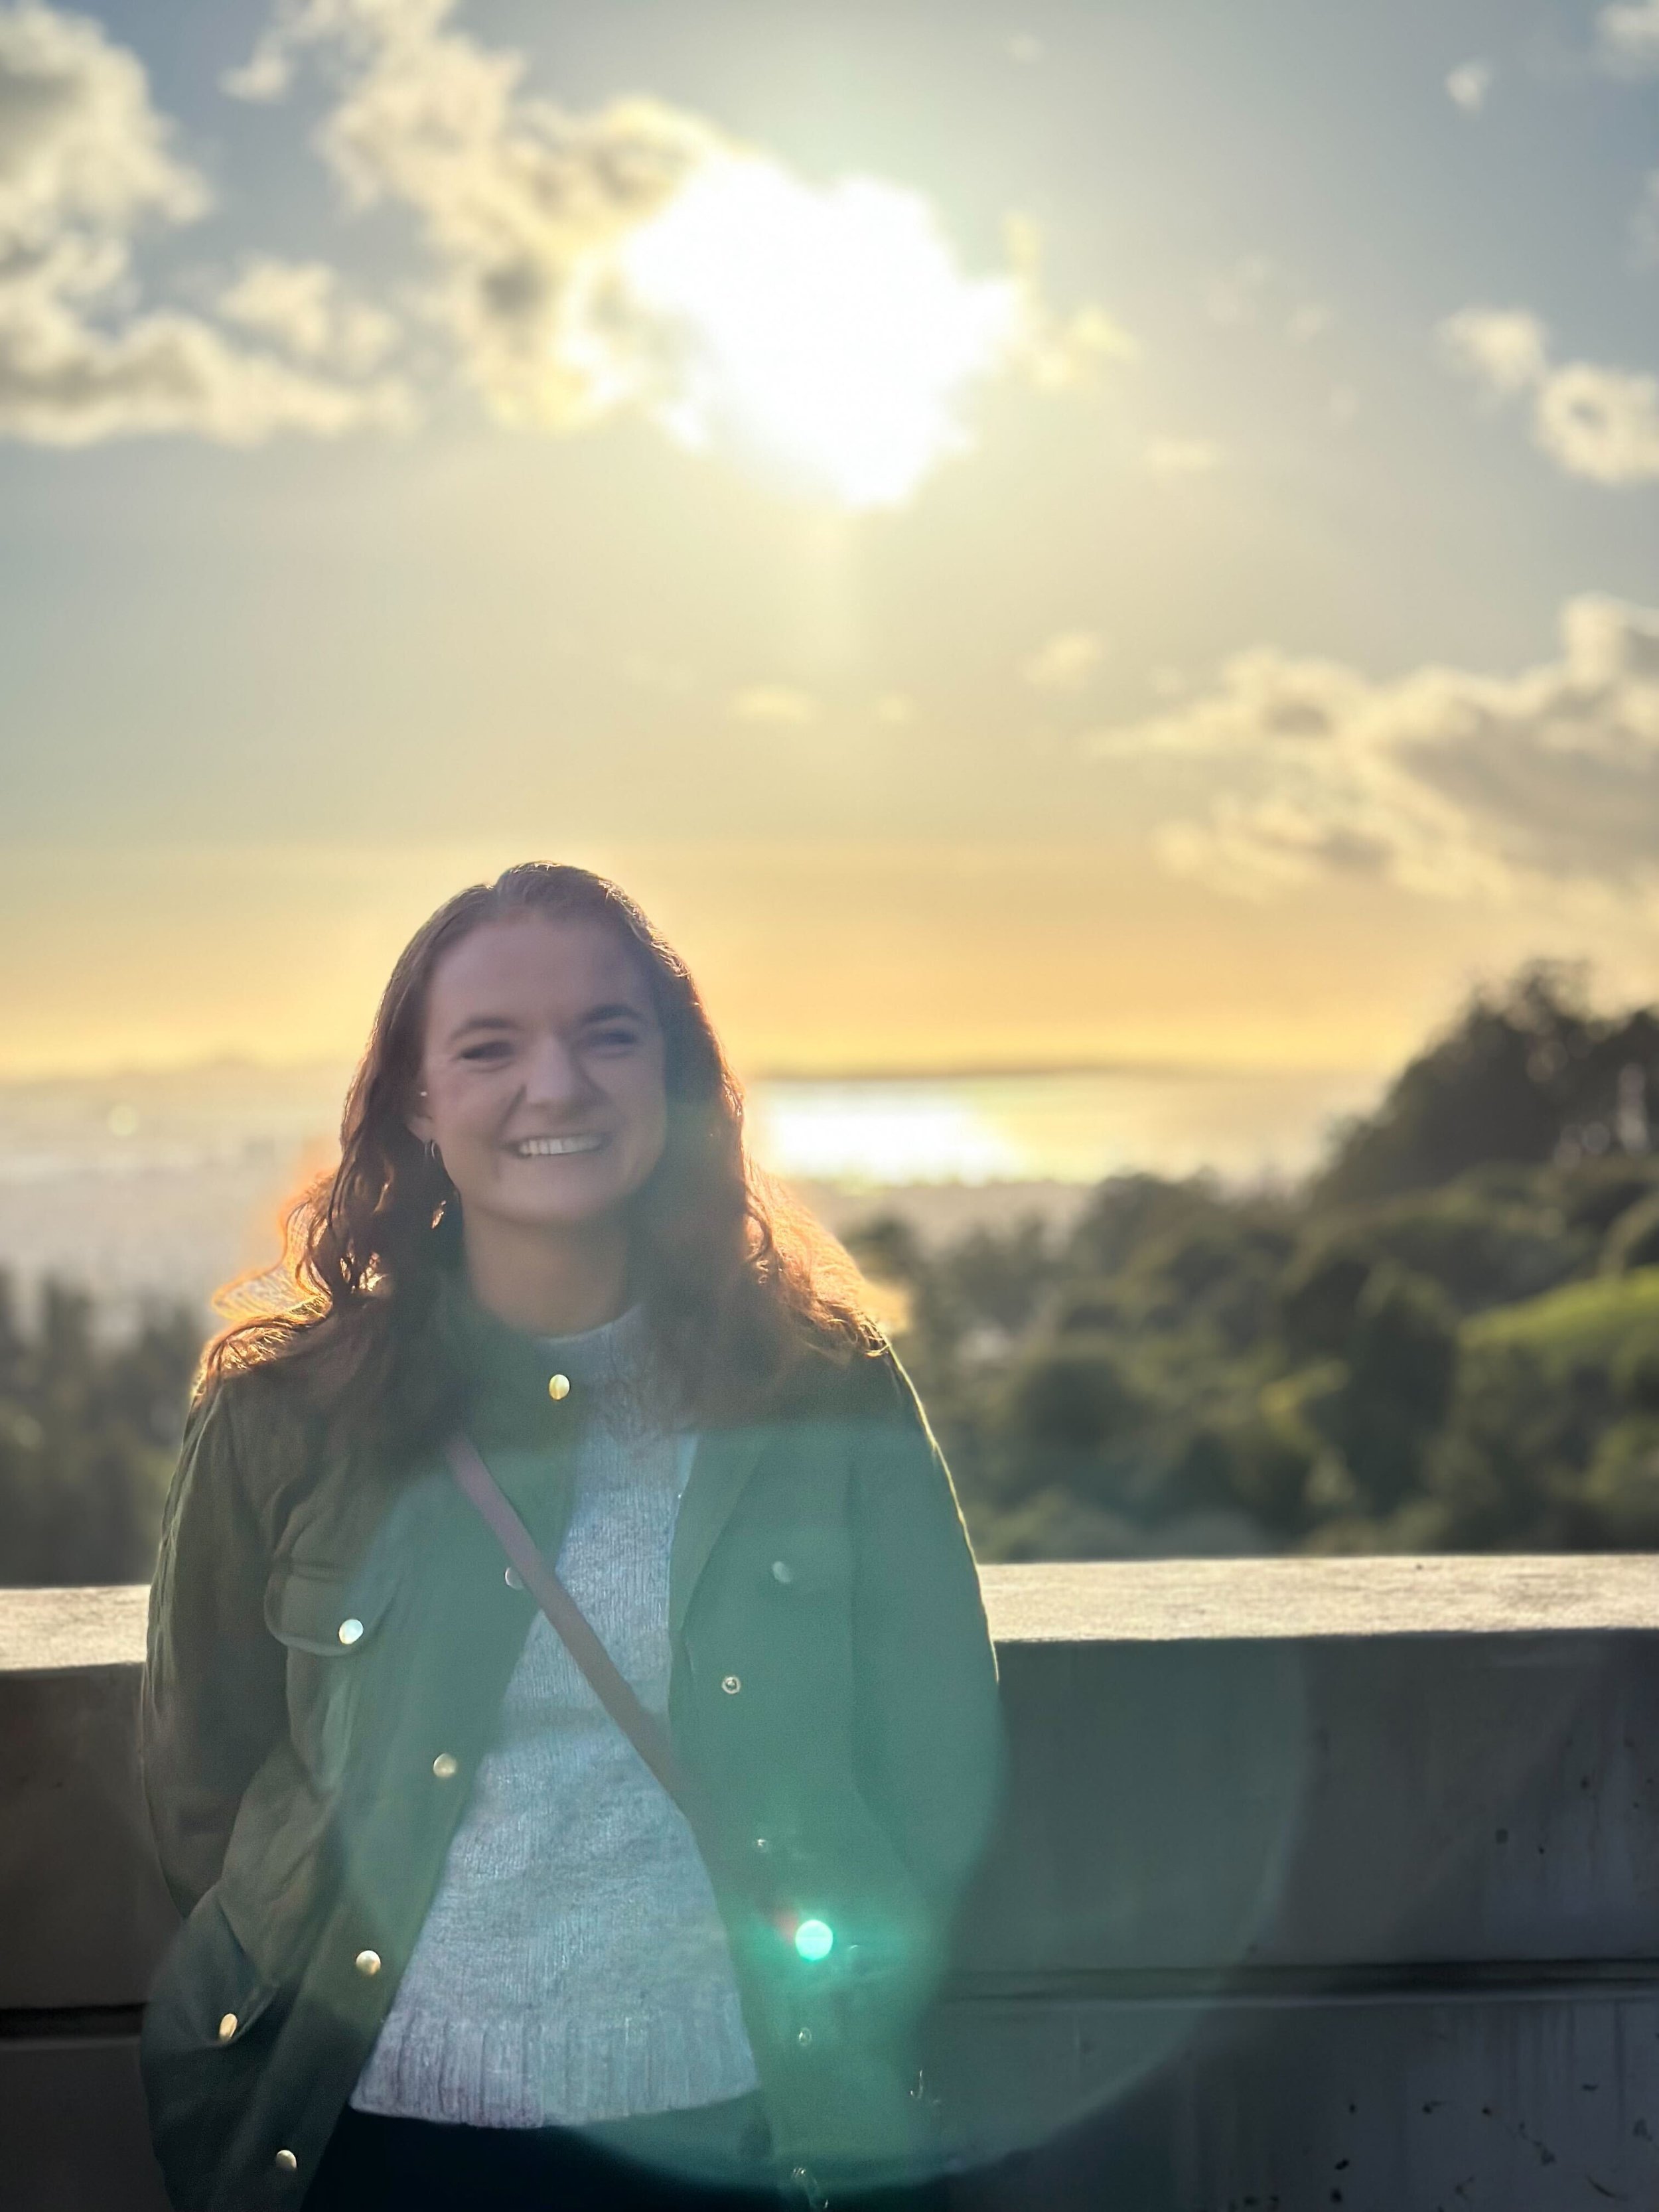  Margaret Lumley (Cohort 2022, co-founder and CEO of ChloBis Water) during Activate Anywhere's in-person meet-up in Berkeley. 